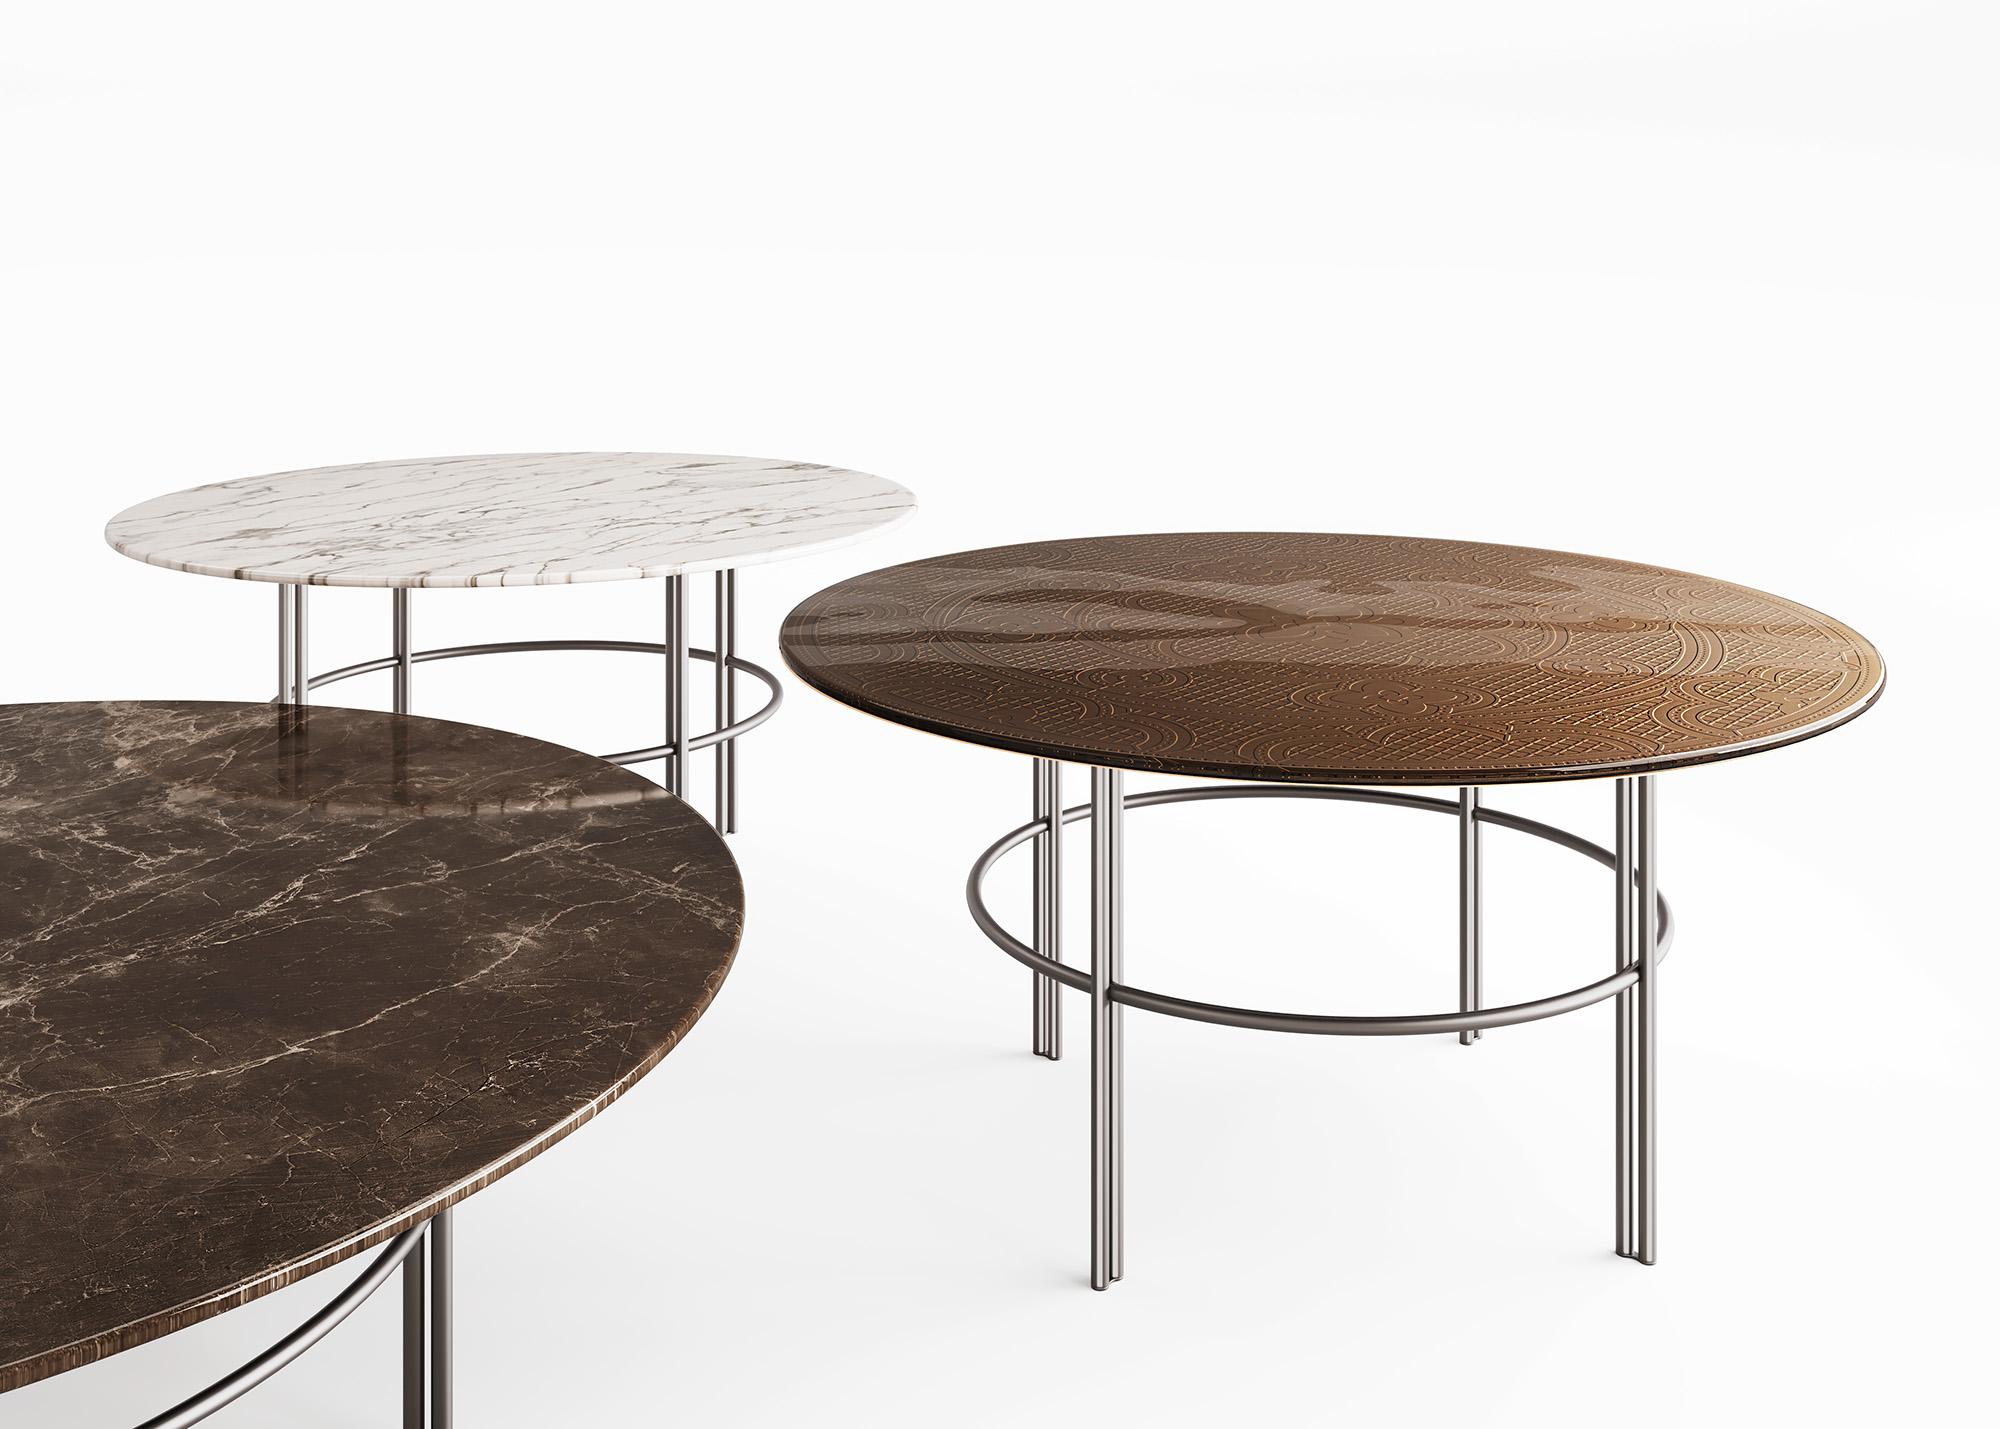 Fiam Italia Set of Three Cristaline Glass Coffee Tables by Marcel Wanders Studio In New Condition For Sale In New York, NY